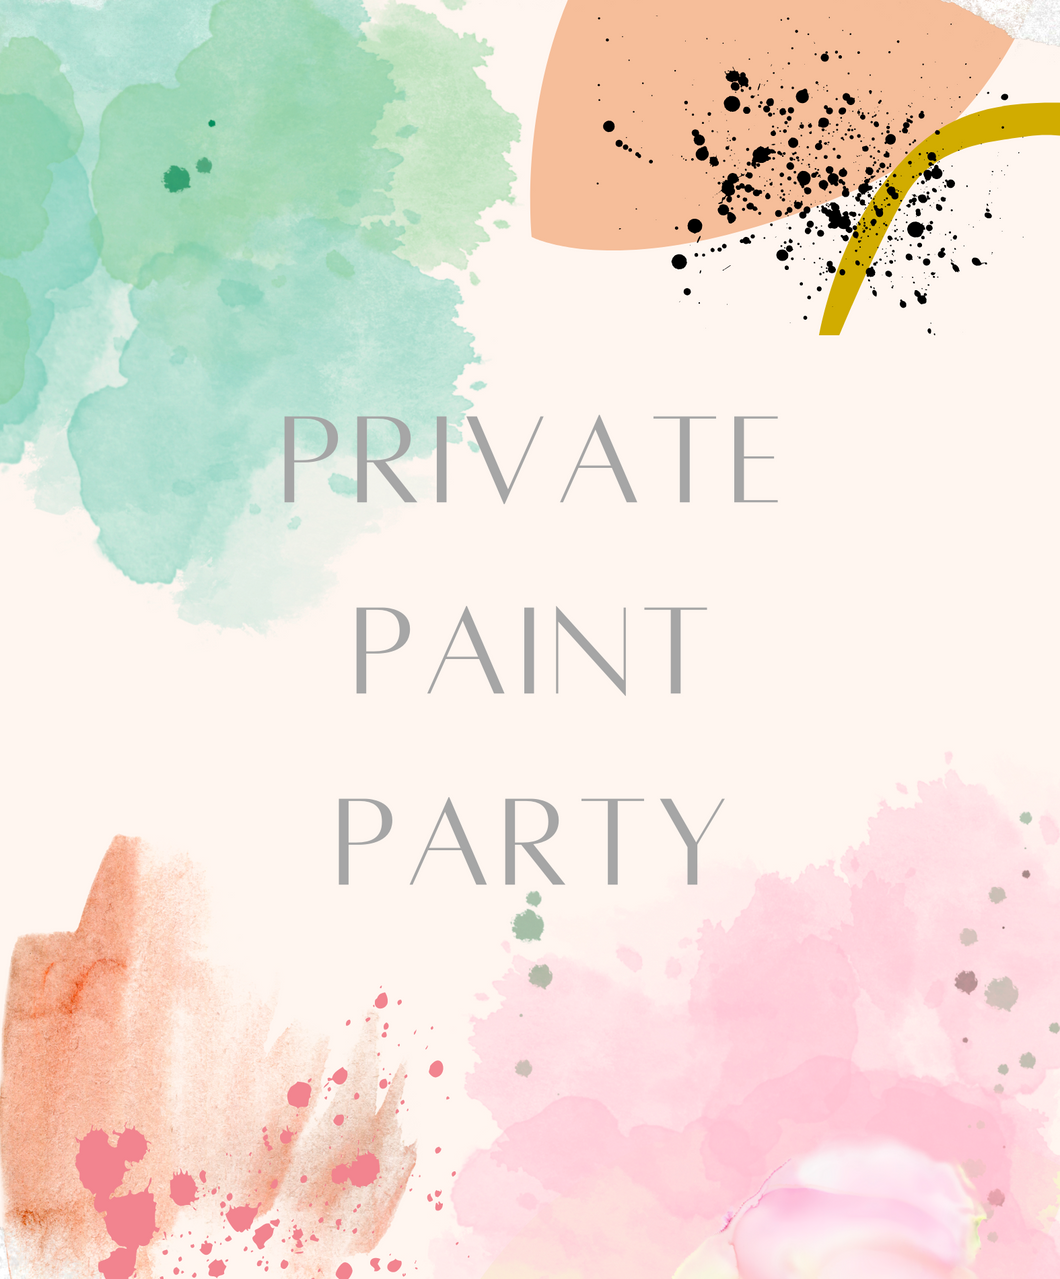 Private Event - Mim's not 30 yet!! - SATURDAY 8th June - 11am